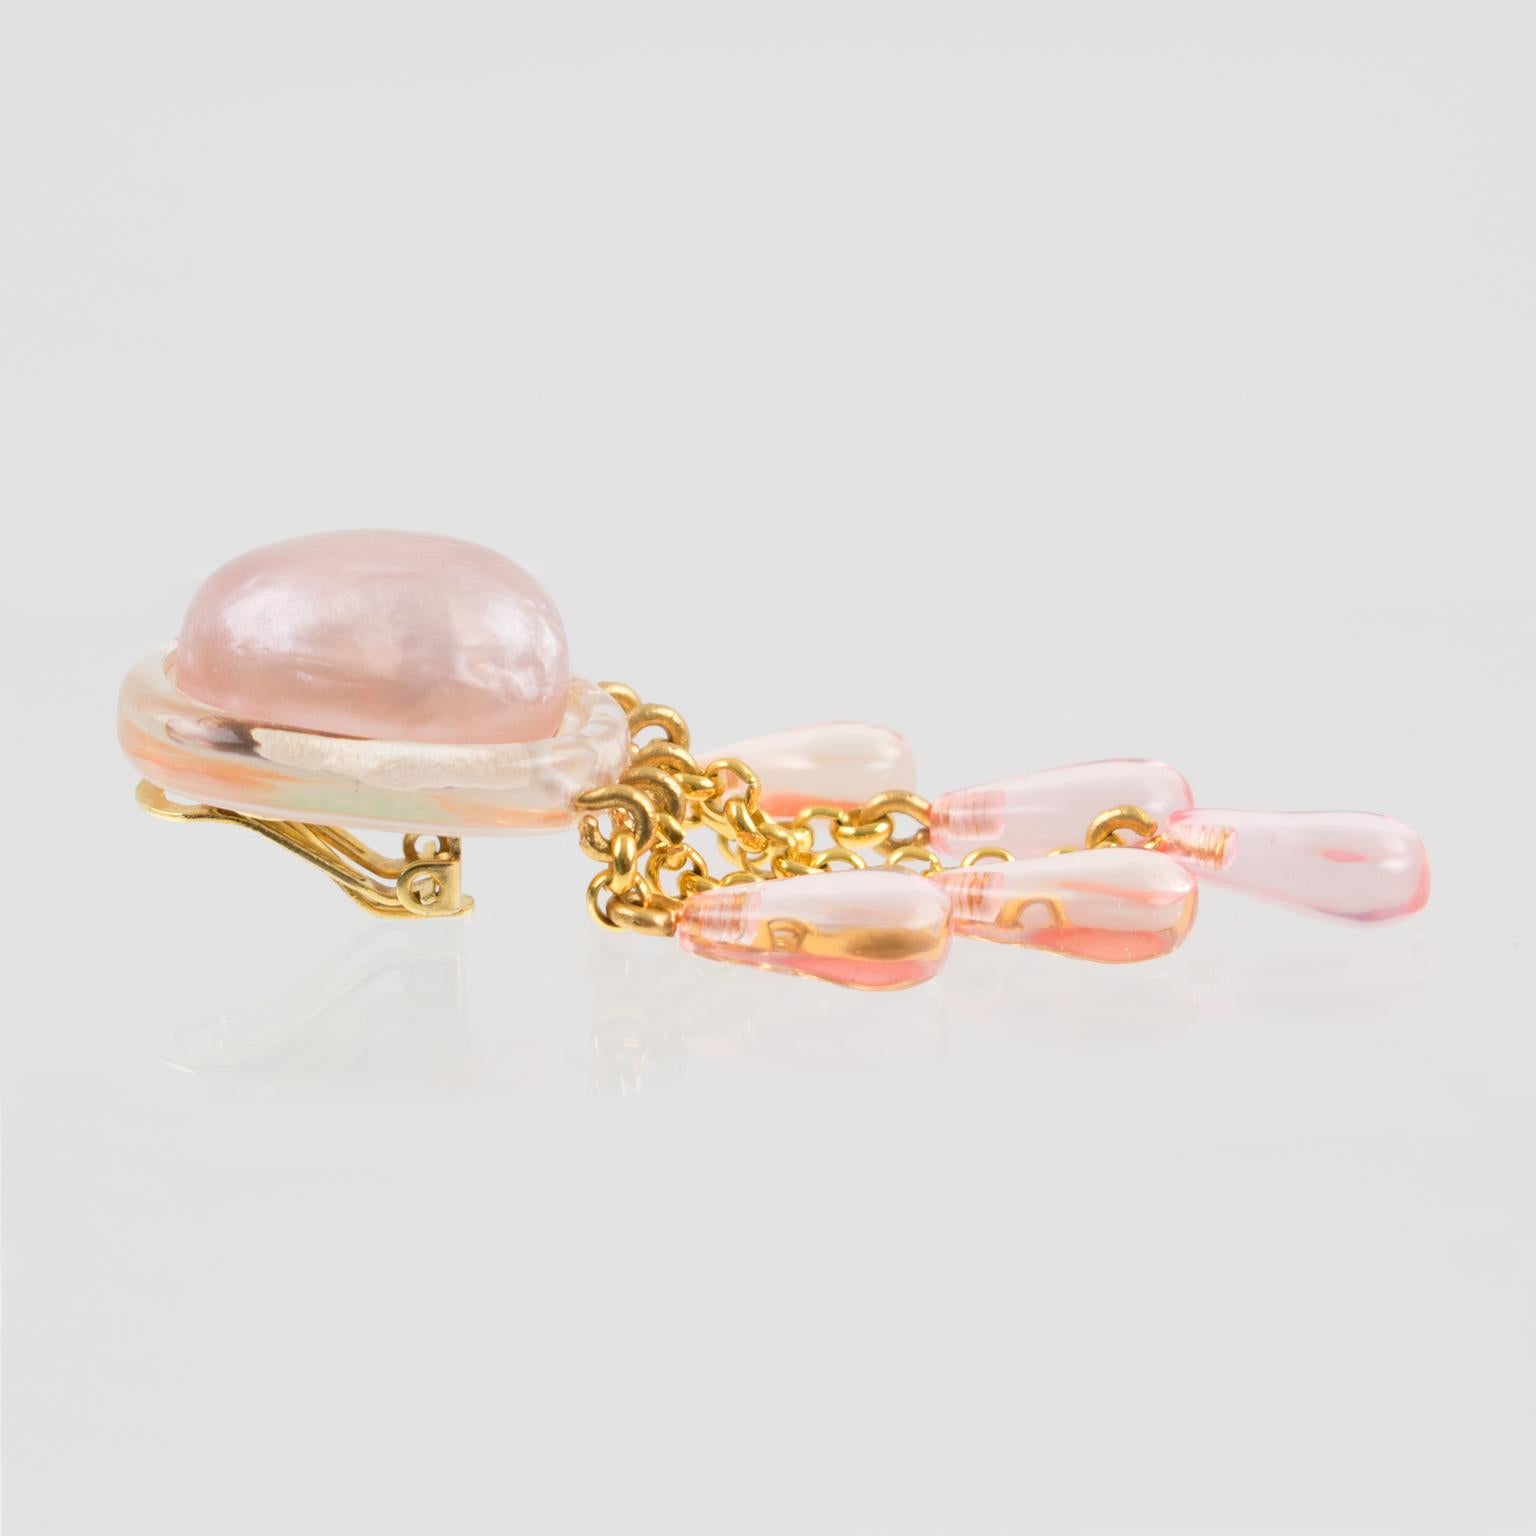 Dominique Denaive Paris Signed Pearlized Pink Resin Dangling Clip on Earrings 2